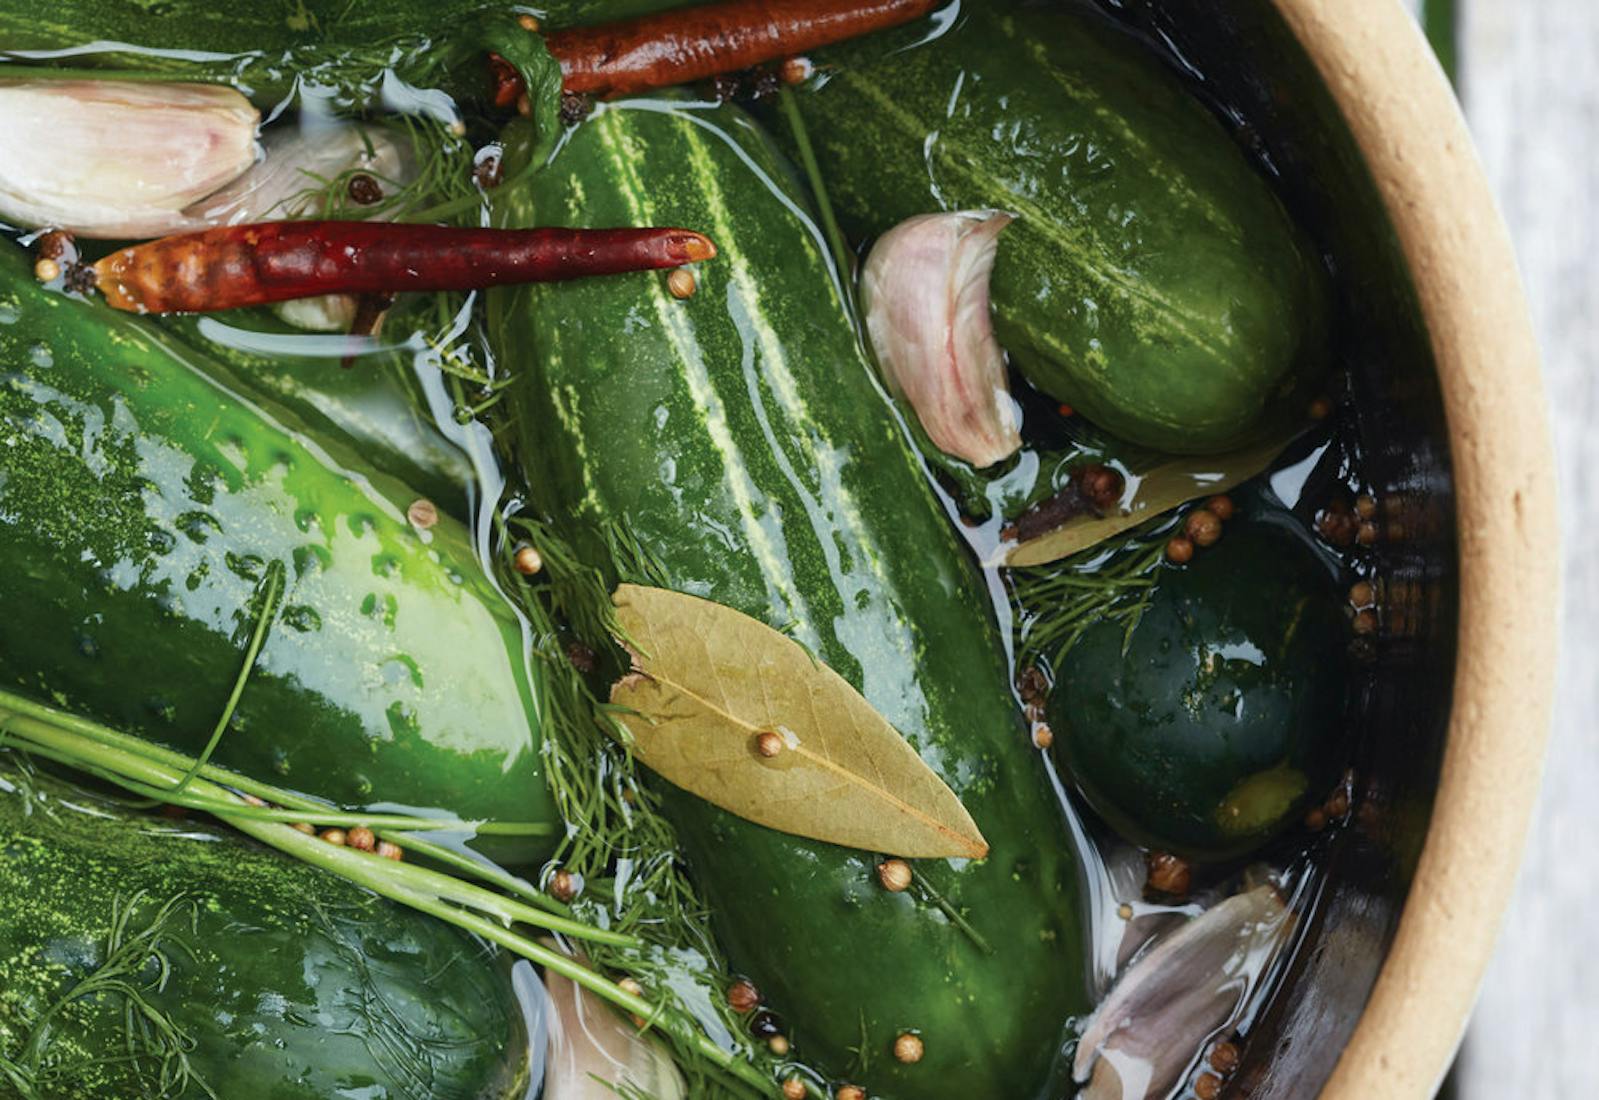 Dill pickles in brine with bay leaves, mustard seeds, chile peppers and dill in fermentation crock atop wooden surface.